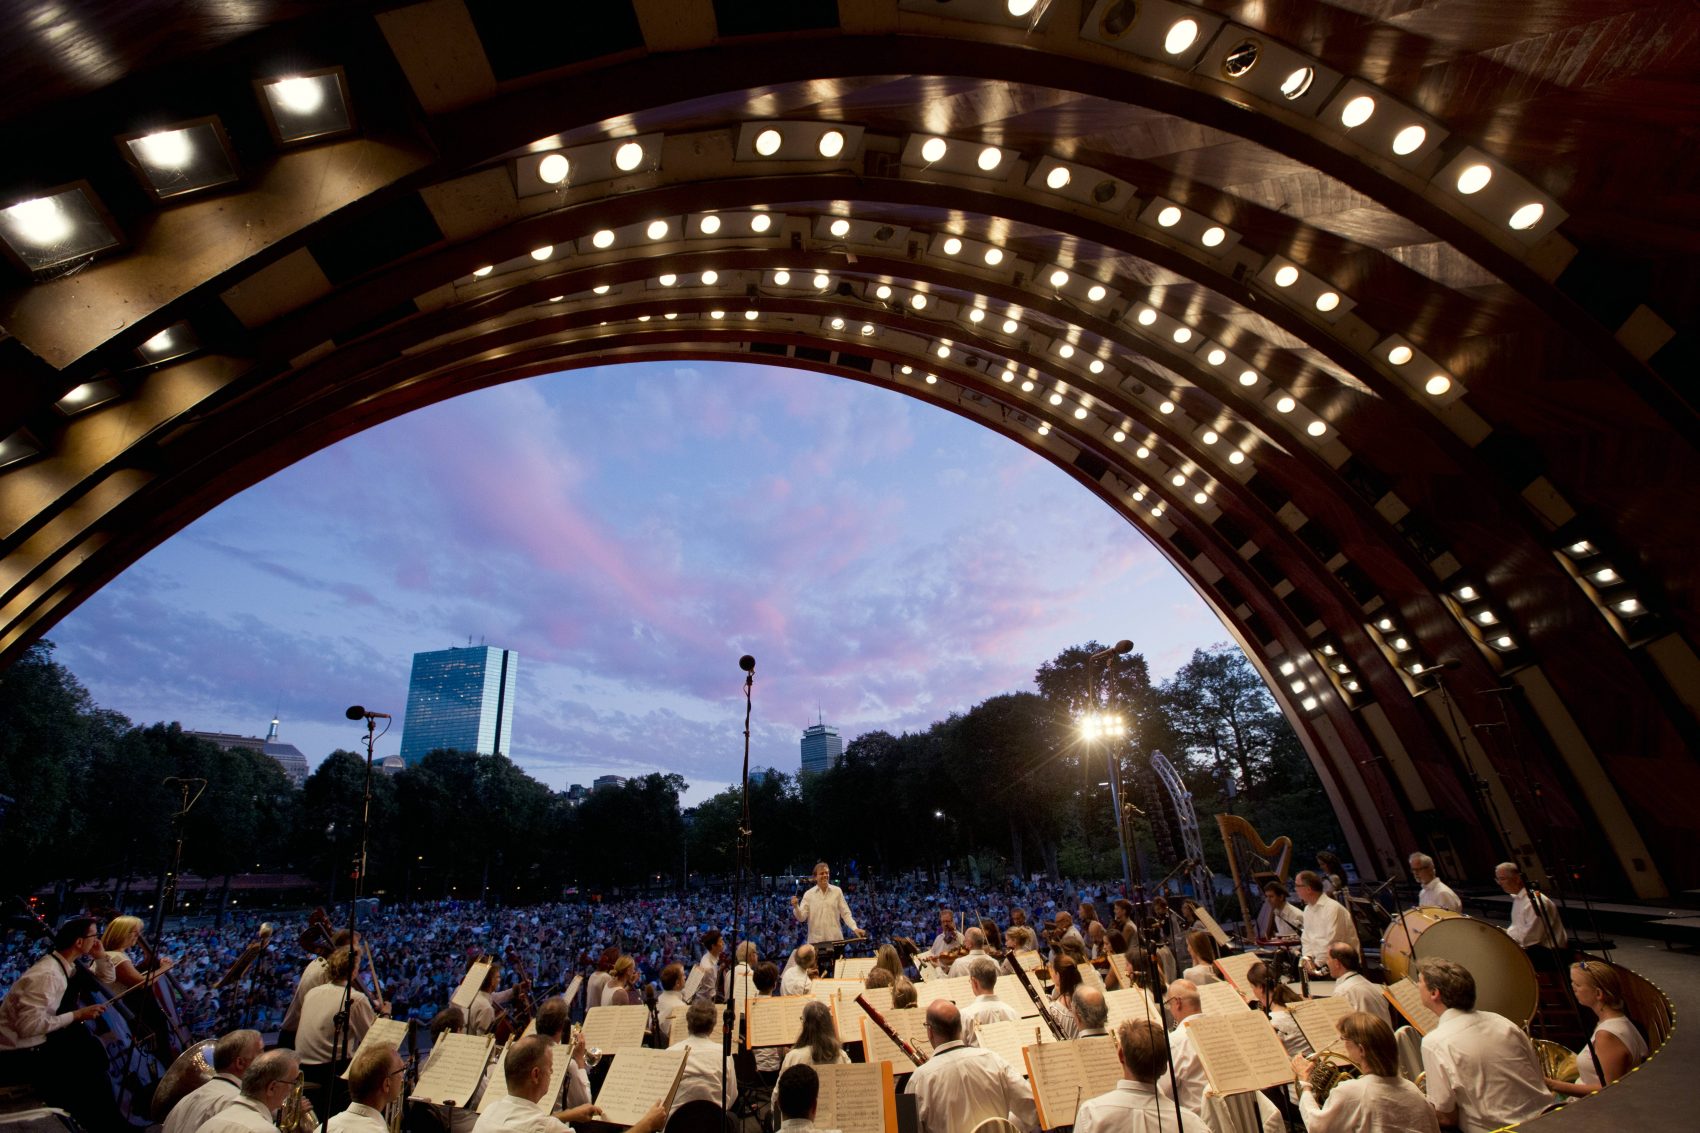 The Boston Landmarks Orchestra performing at the Hatch Shell. (Courtesy Michael Dwyer)